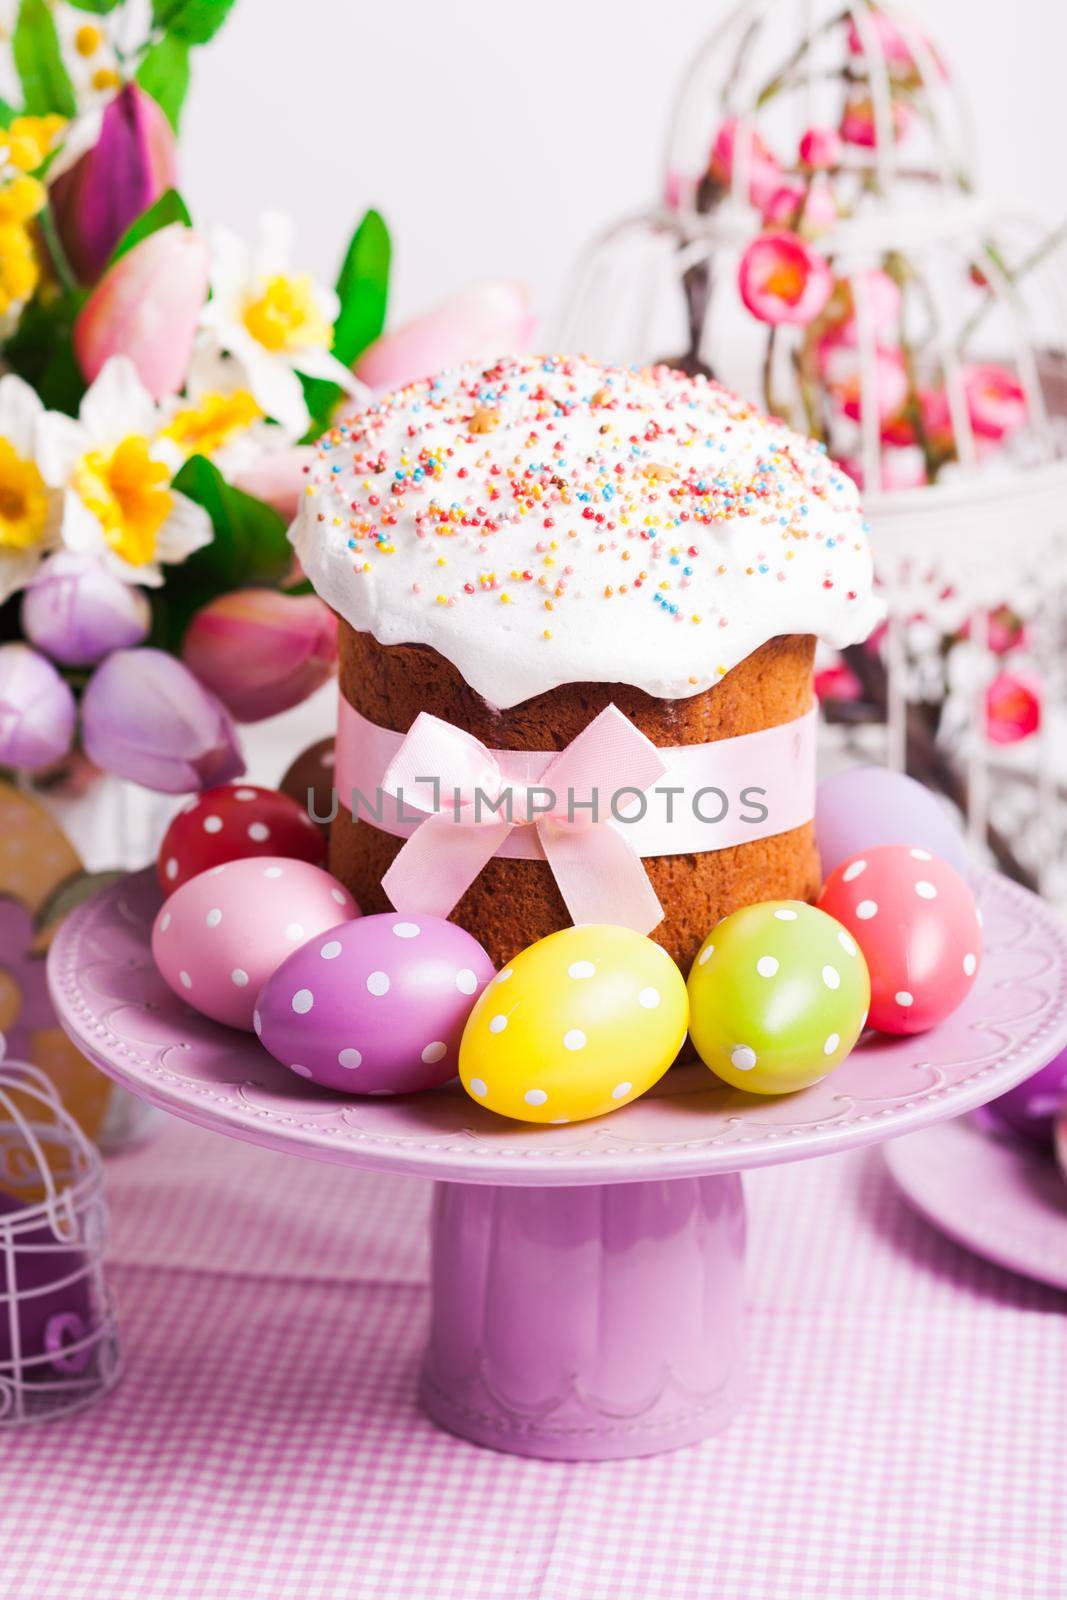 Easter cake and colorful polka dot eggs on the plate and flowers on the foreground